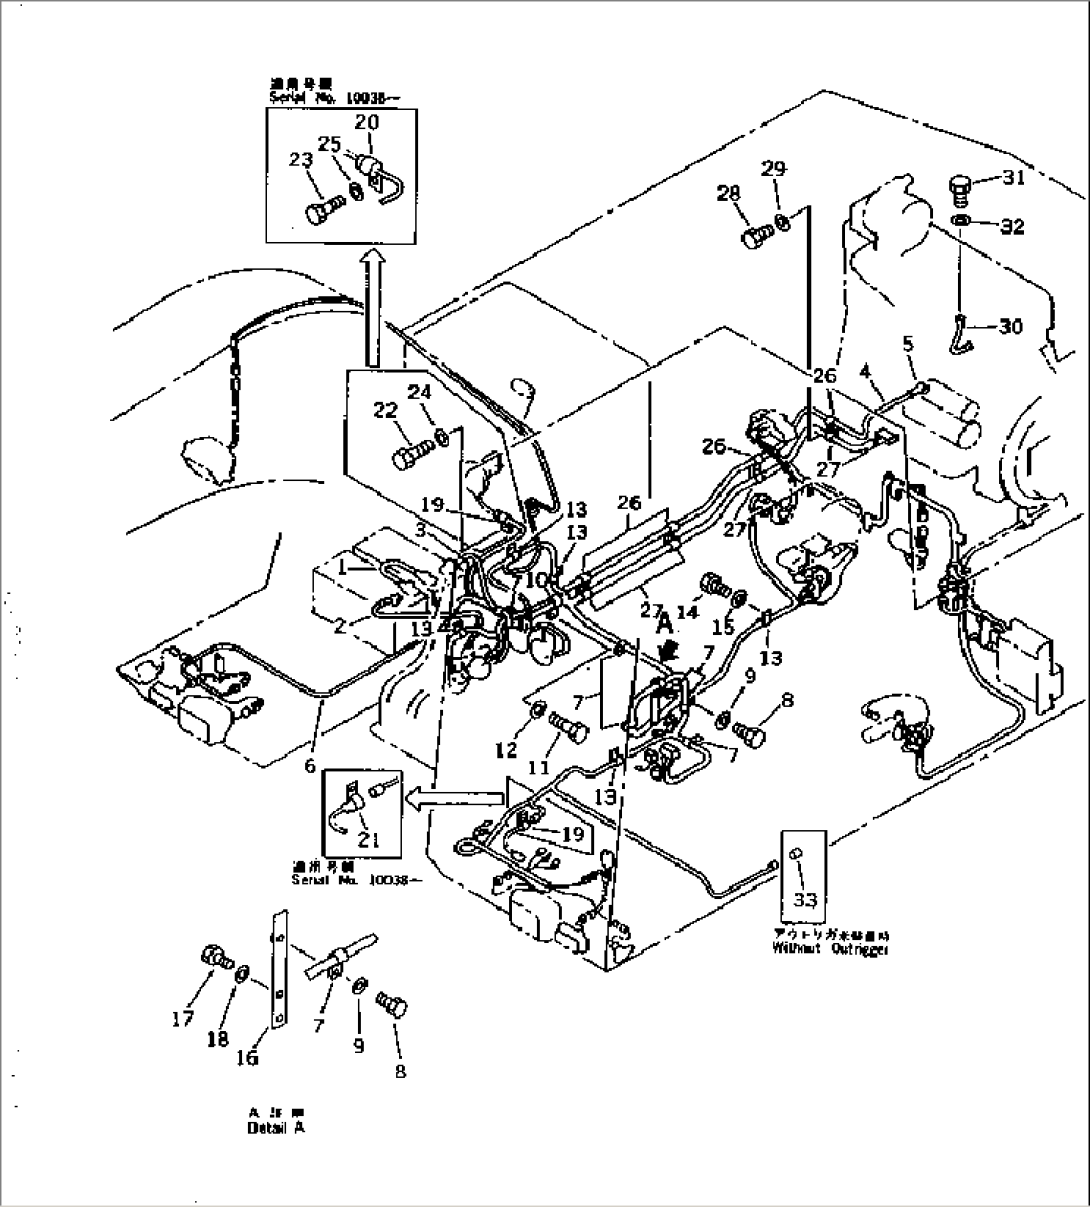 ELECTRICAL SYSTEM (WIRING)(#10001-10101)